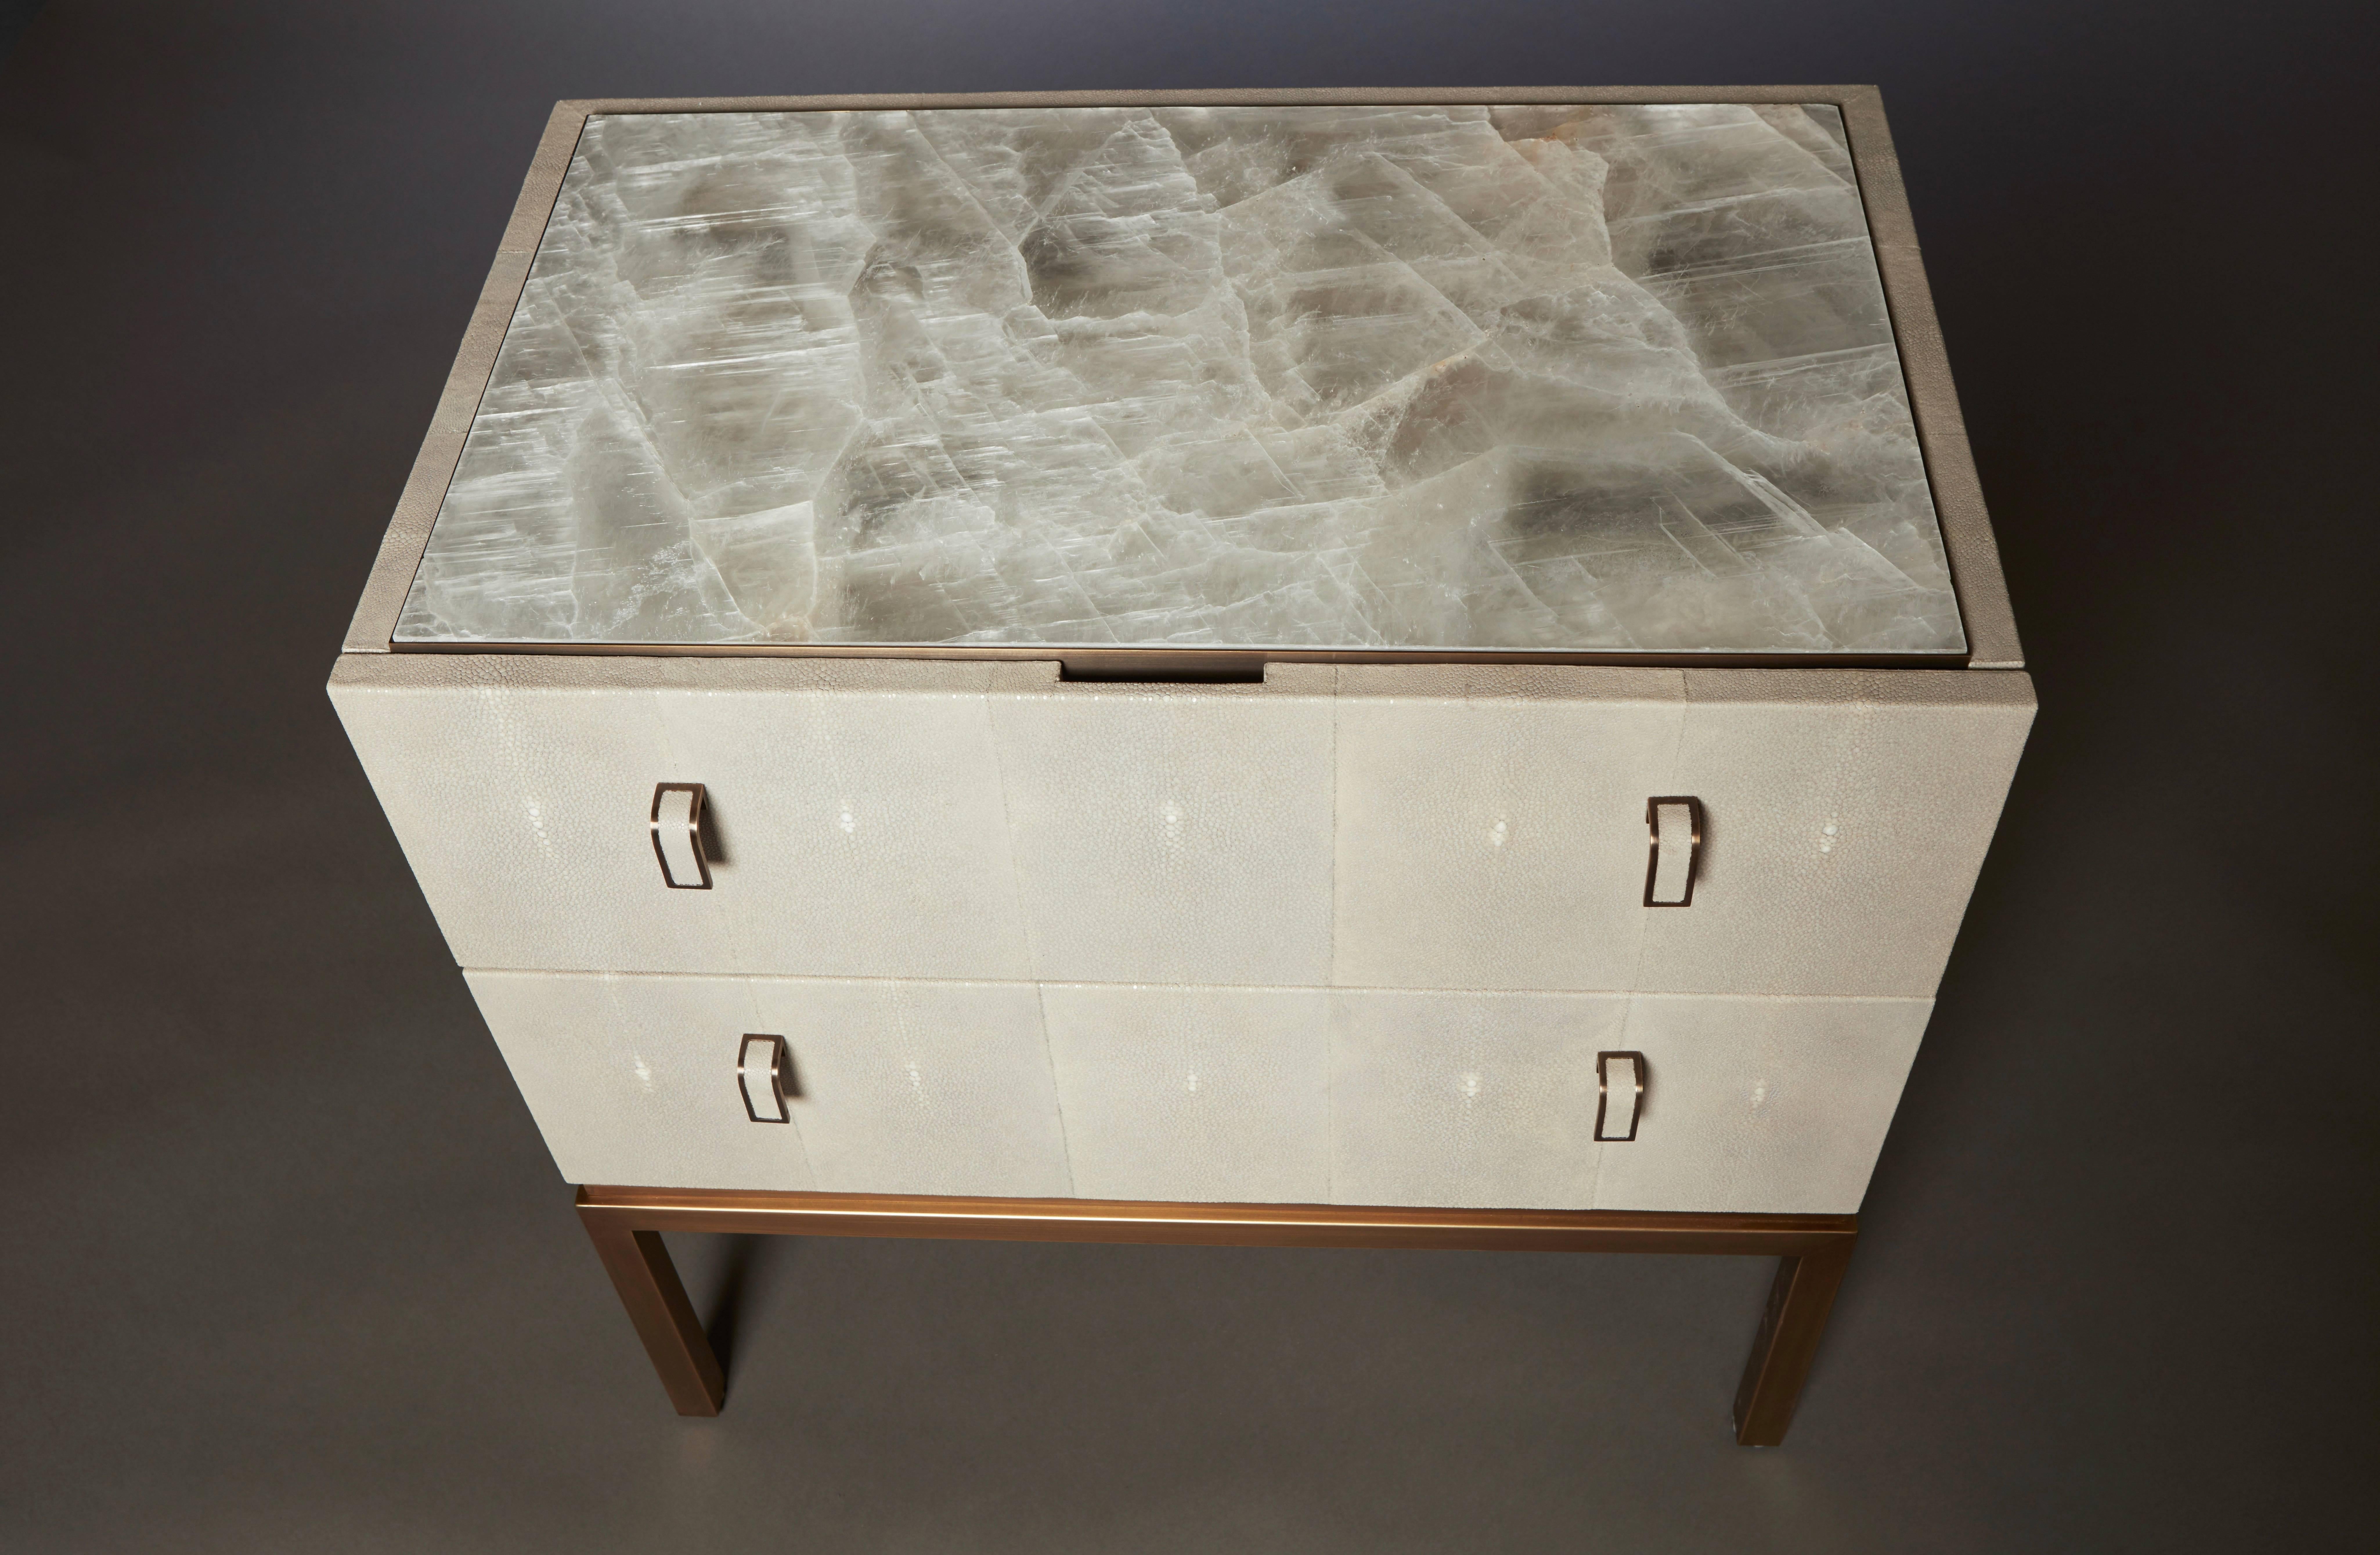 The Water nightstands feature two hand-dyed shagreen drawers with lacquered solid oak interiors sitting atop a decorative patinated bronze edge band. Chosen for its alchemical and healing properties, the translucent selenite tabletop is associated